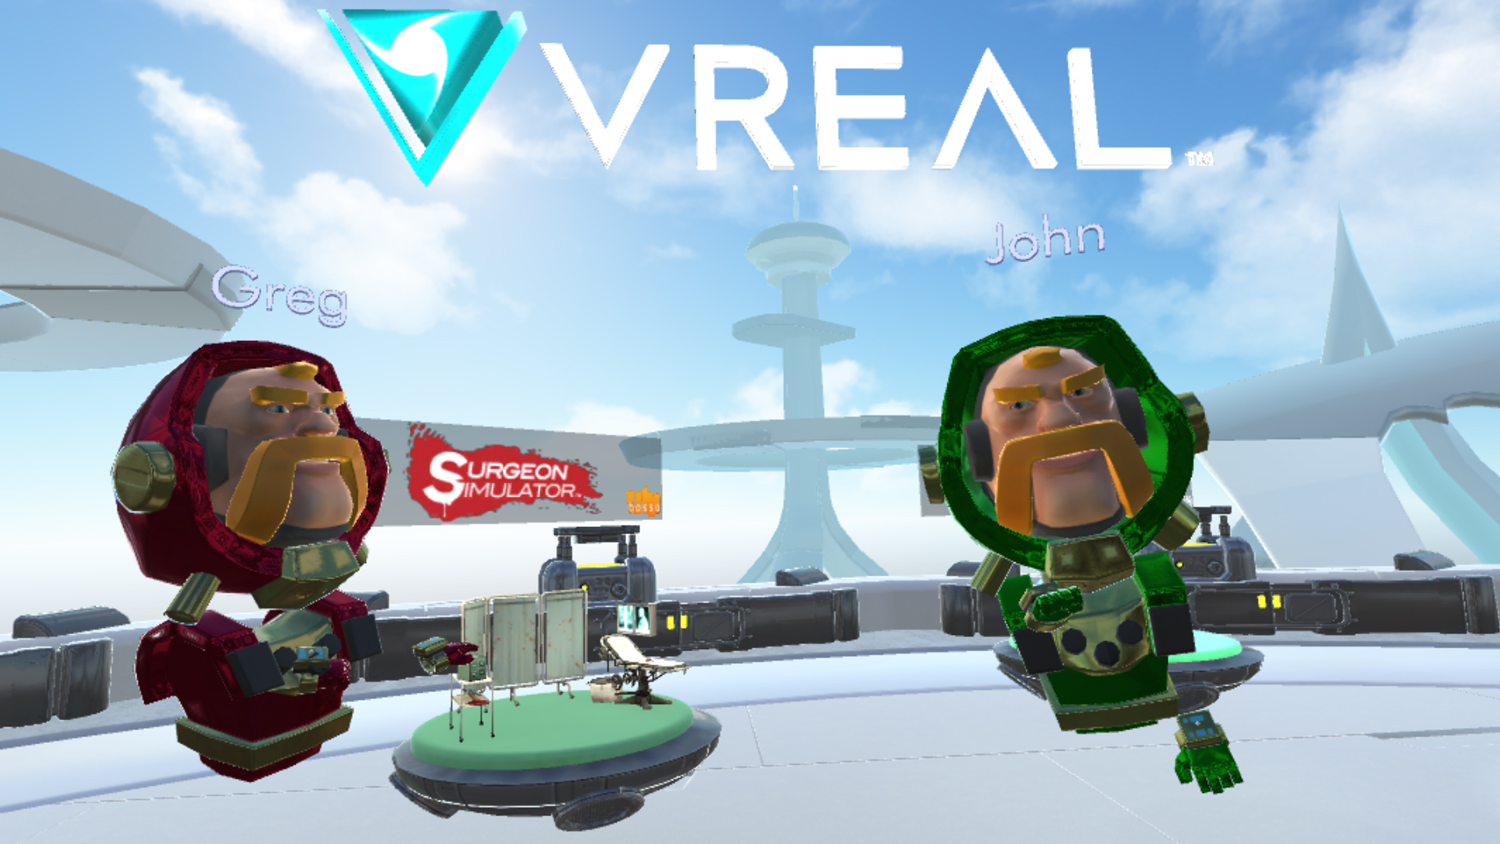 VReal-Avatars-in-lobby-twitch-vr-streaming